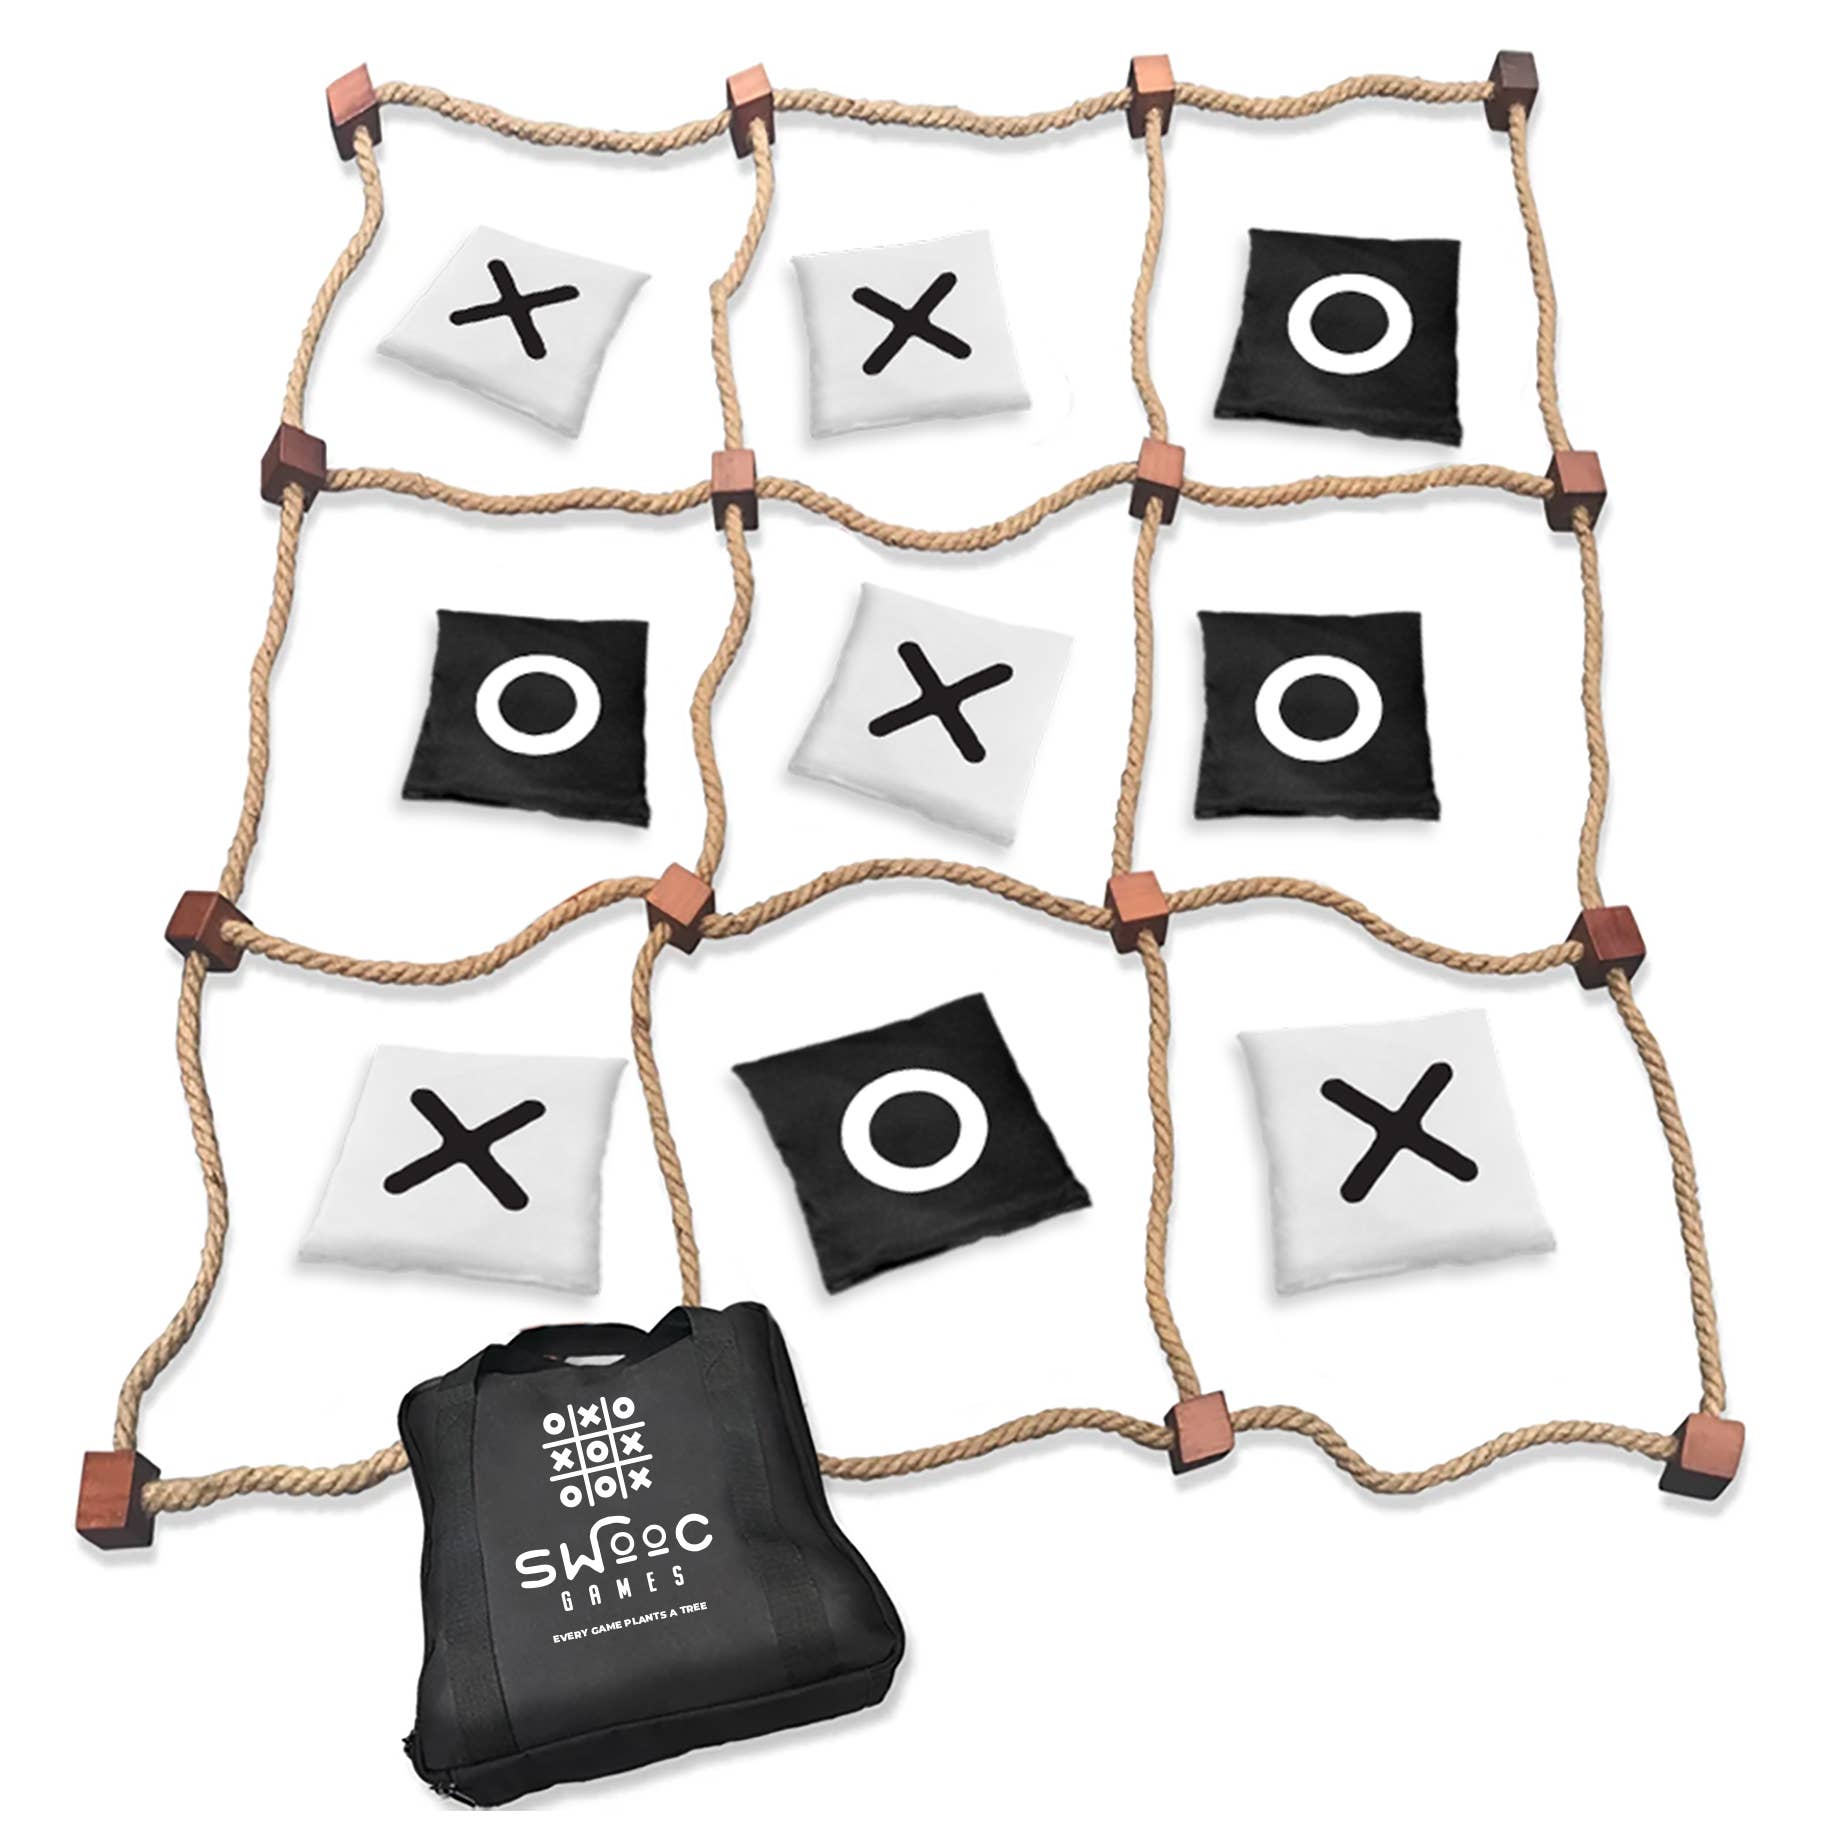 YardGames Outdoor Wood Tic-tac-toe with Case in the Party Games department  at